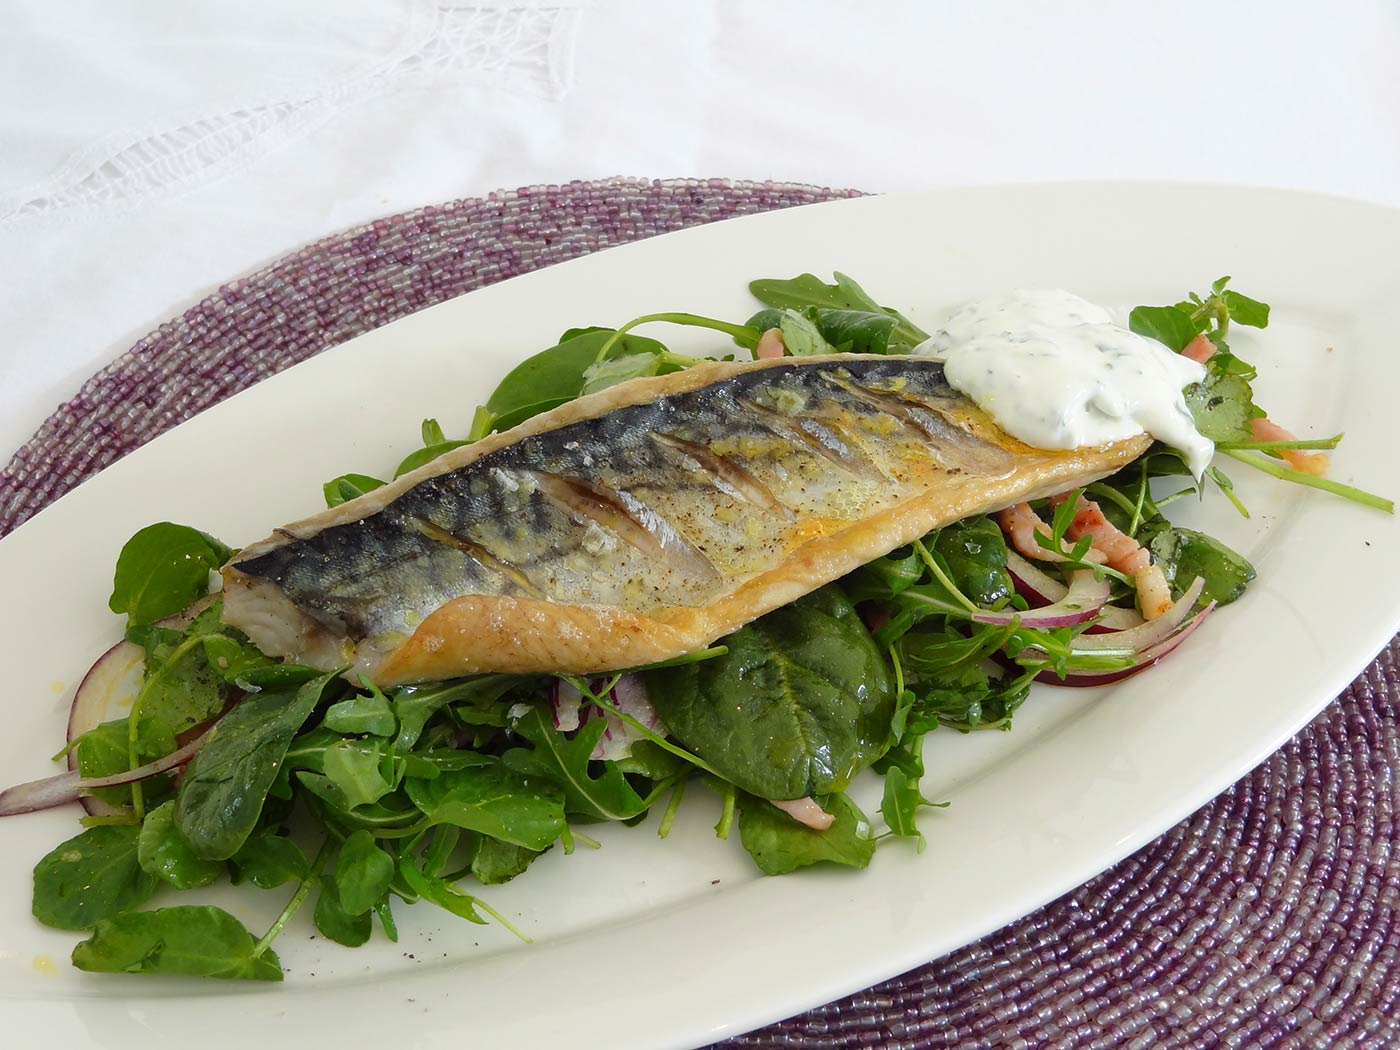 Grilled Mackerel Fillets With Watercress, Smoked Bacon & Herb Crème Fraiche1400 x 1050